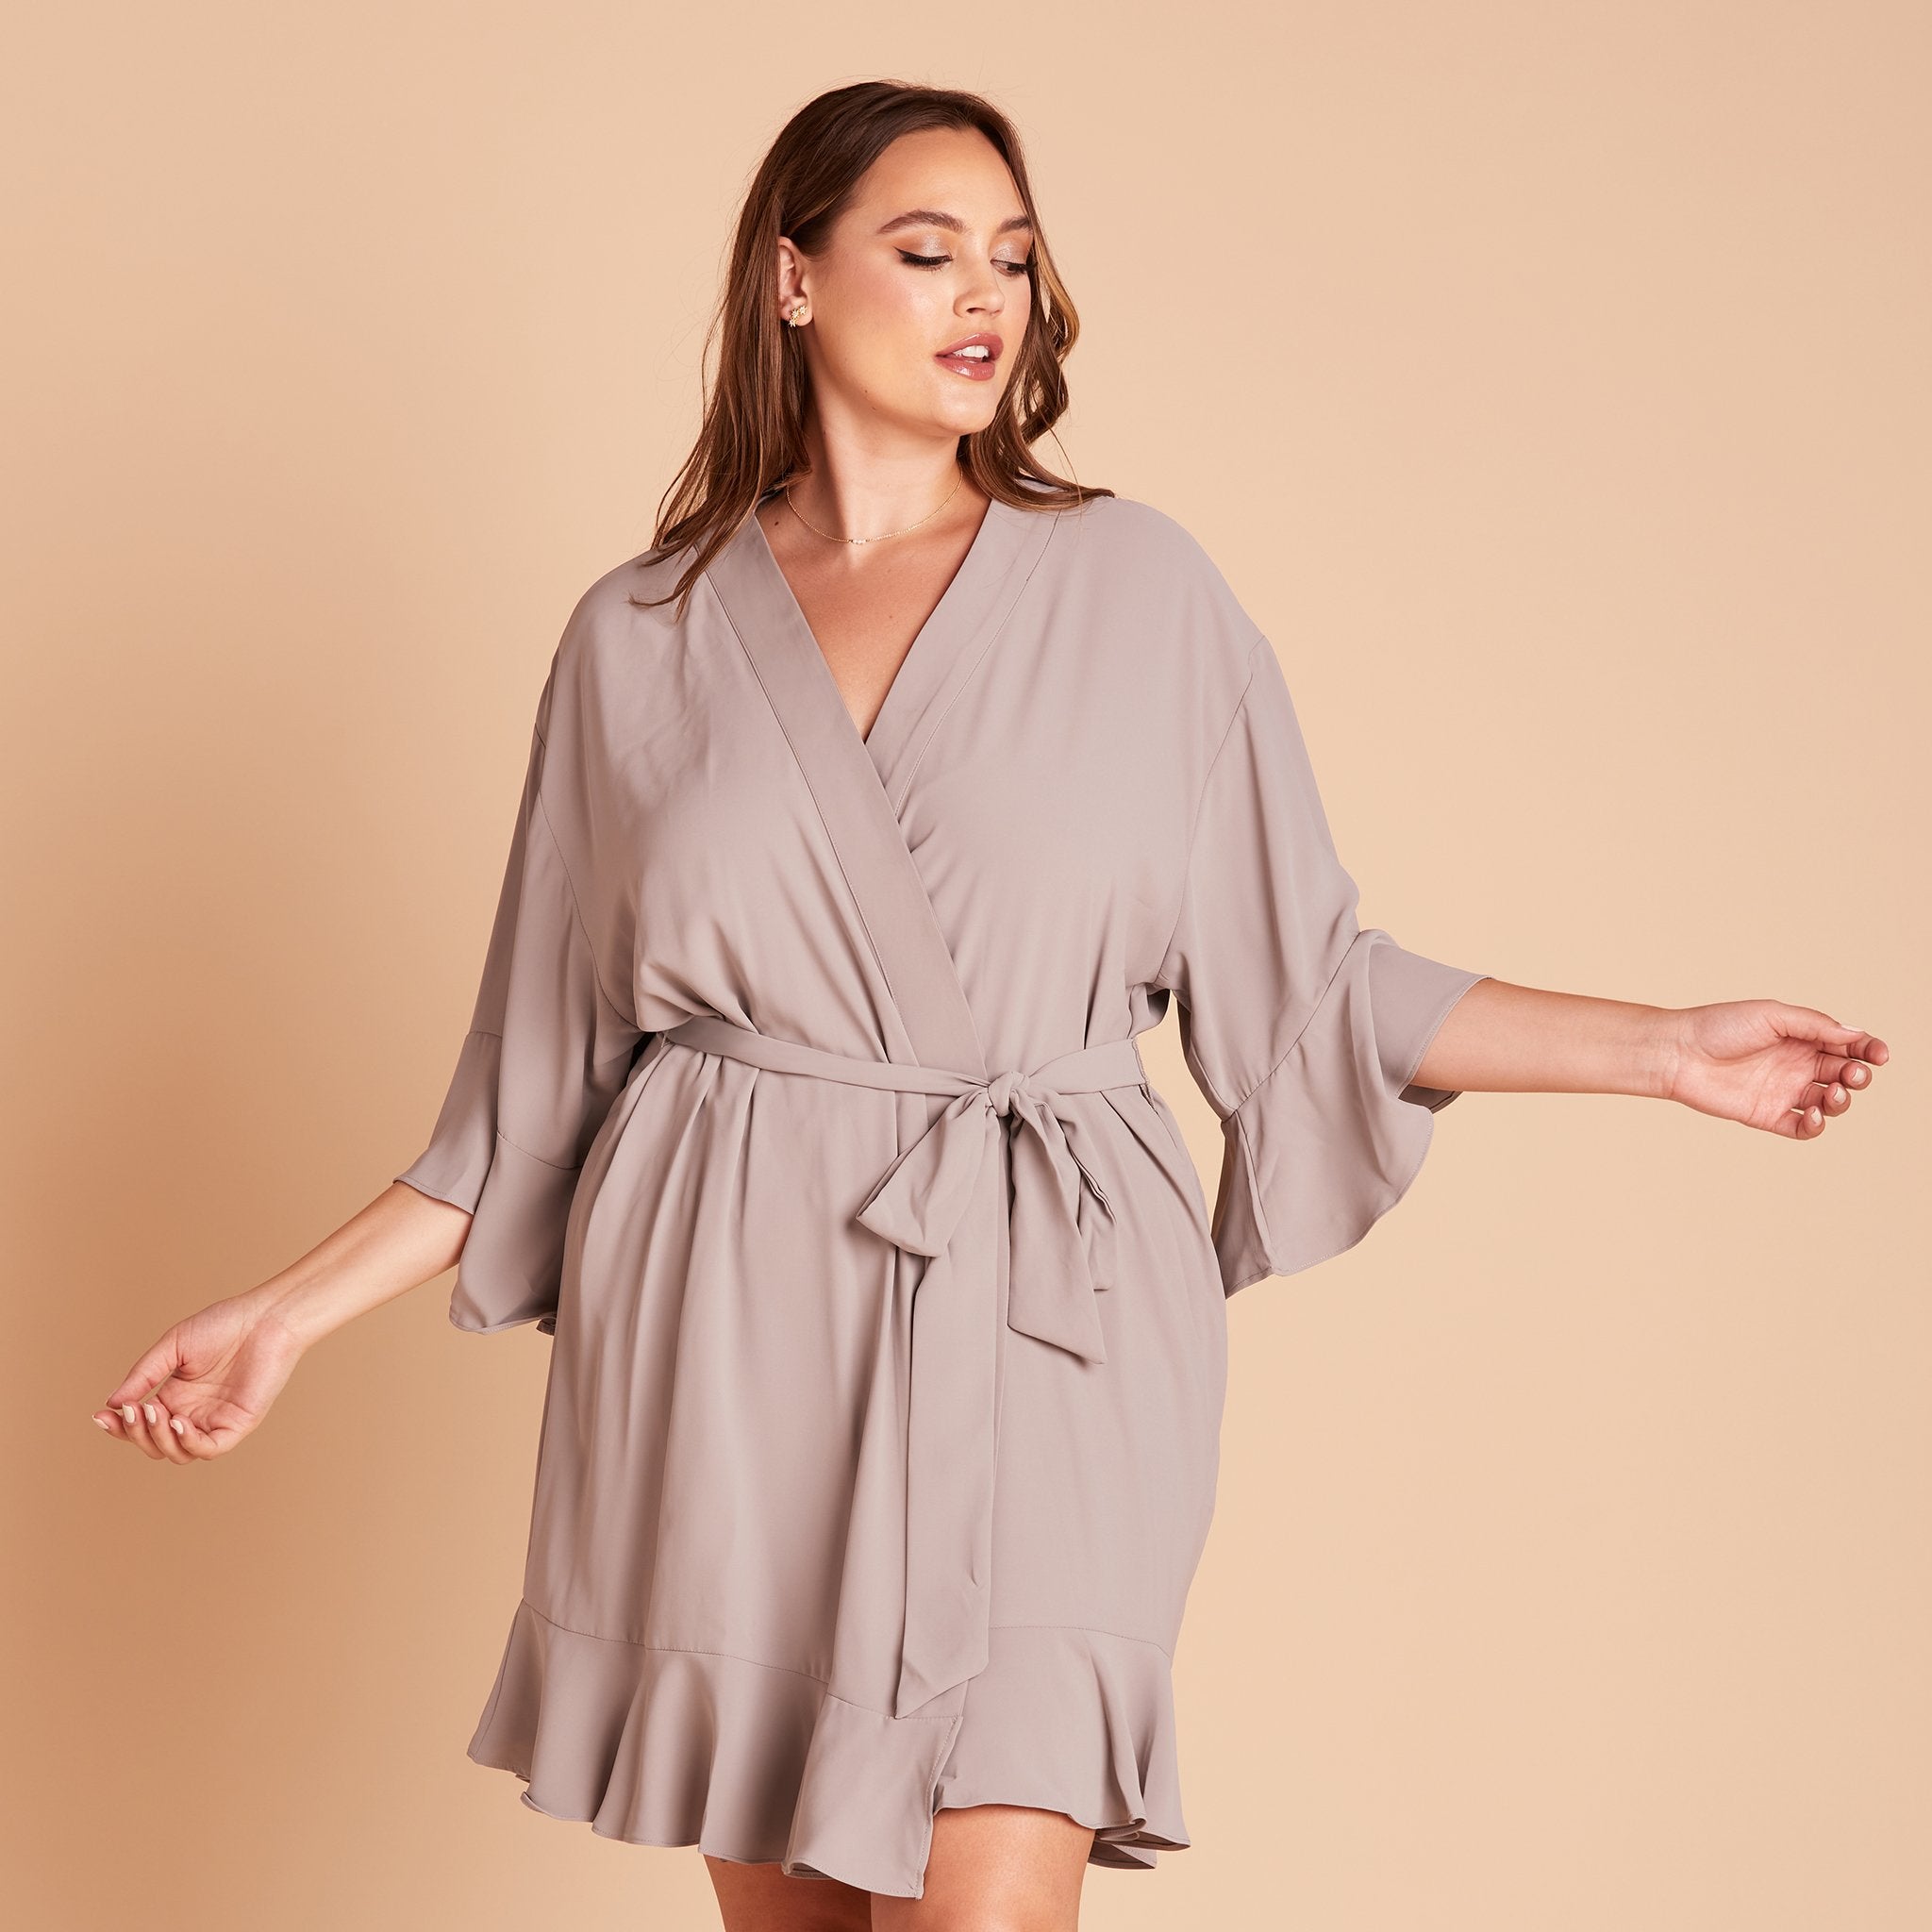 Kenny Ruffle Robe in gray by Birdy Grey, front view